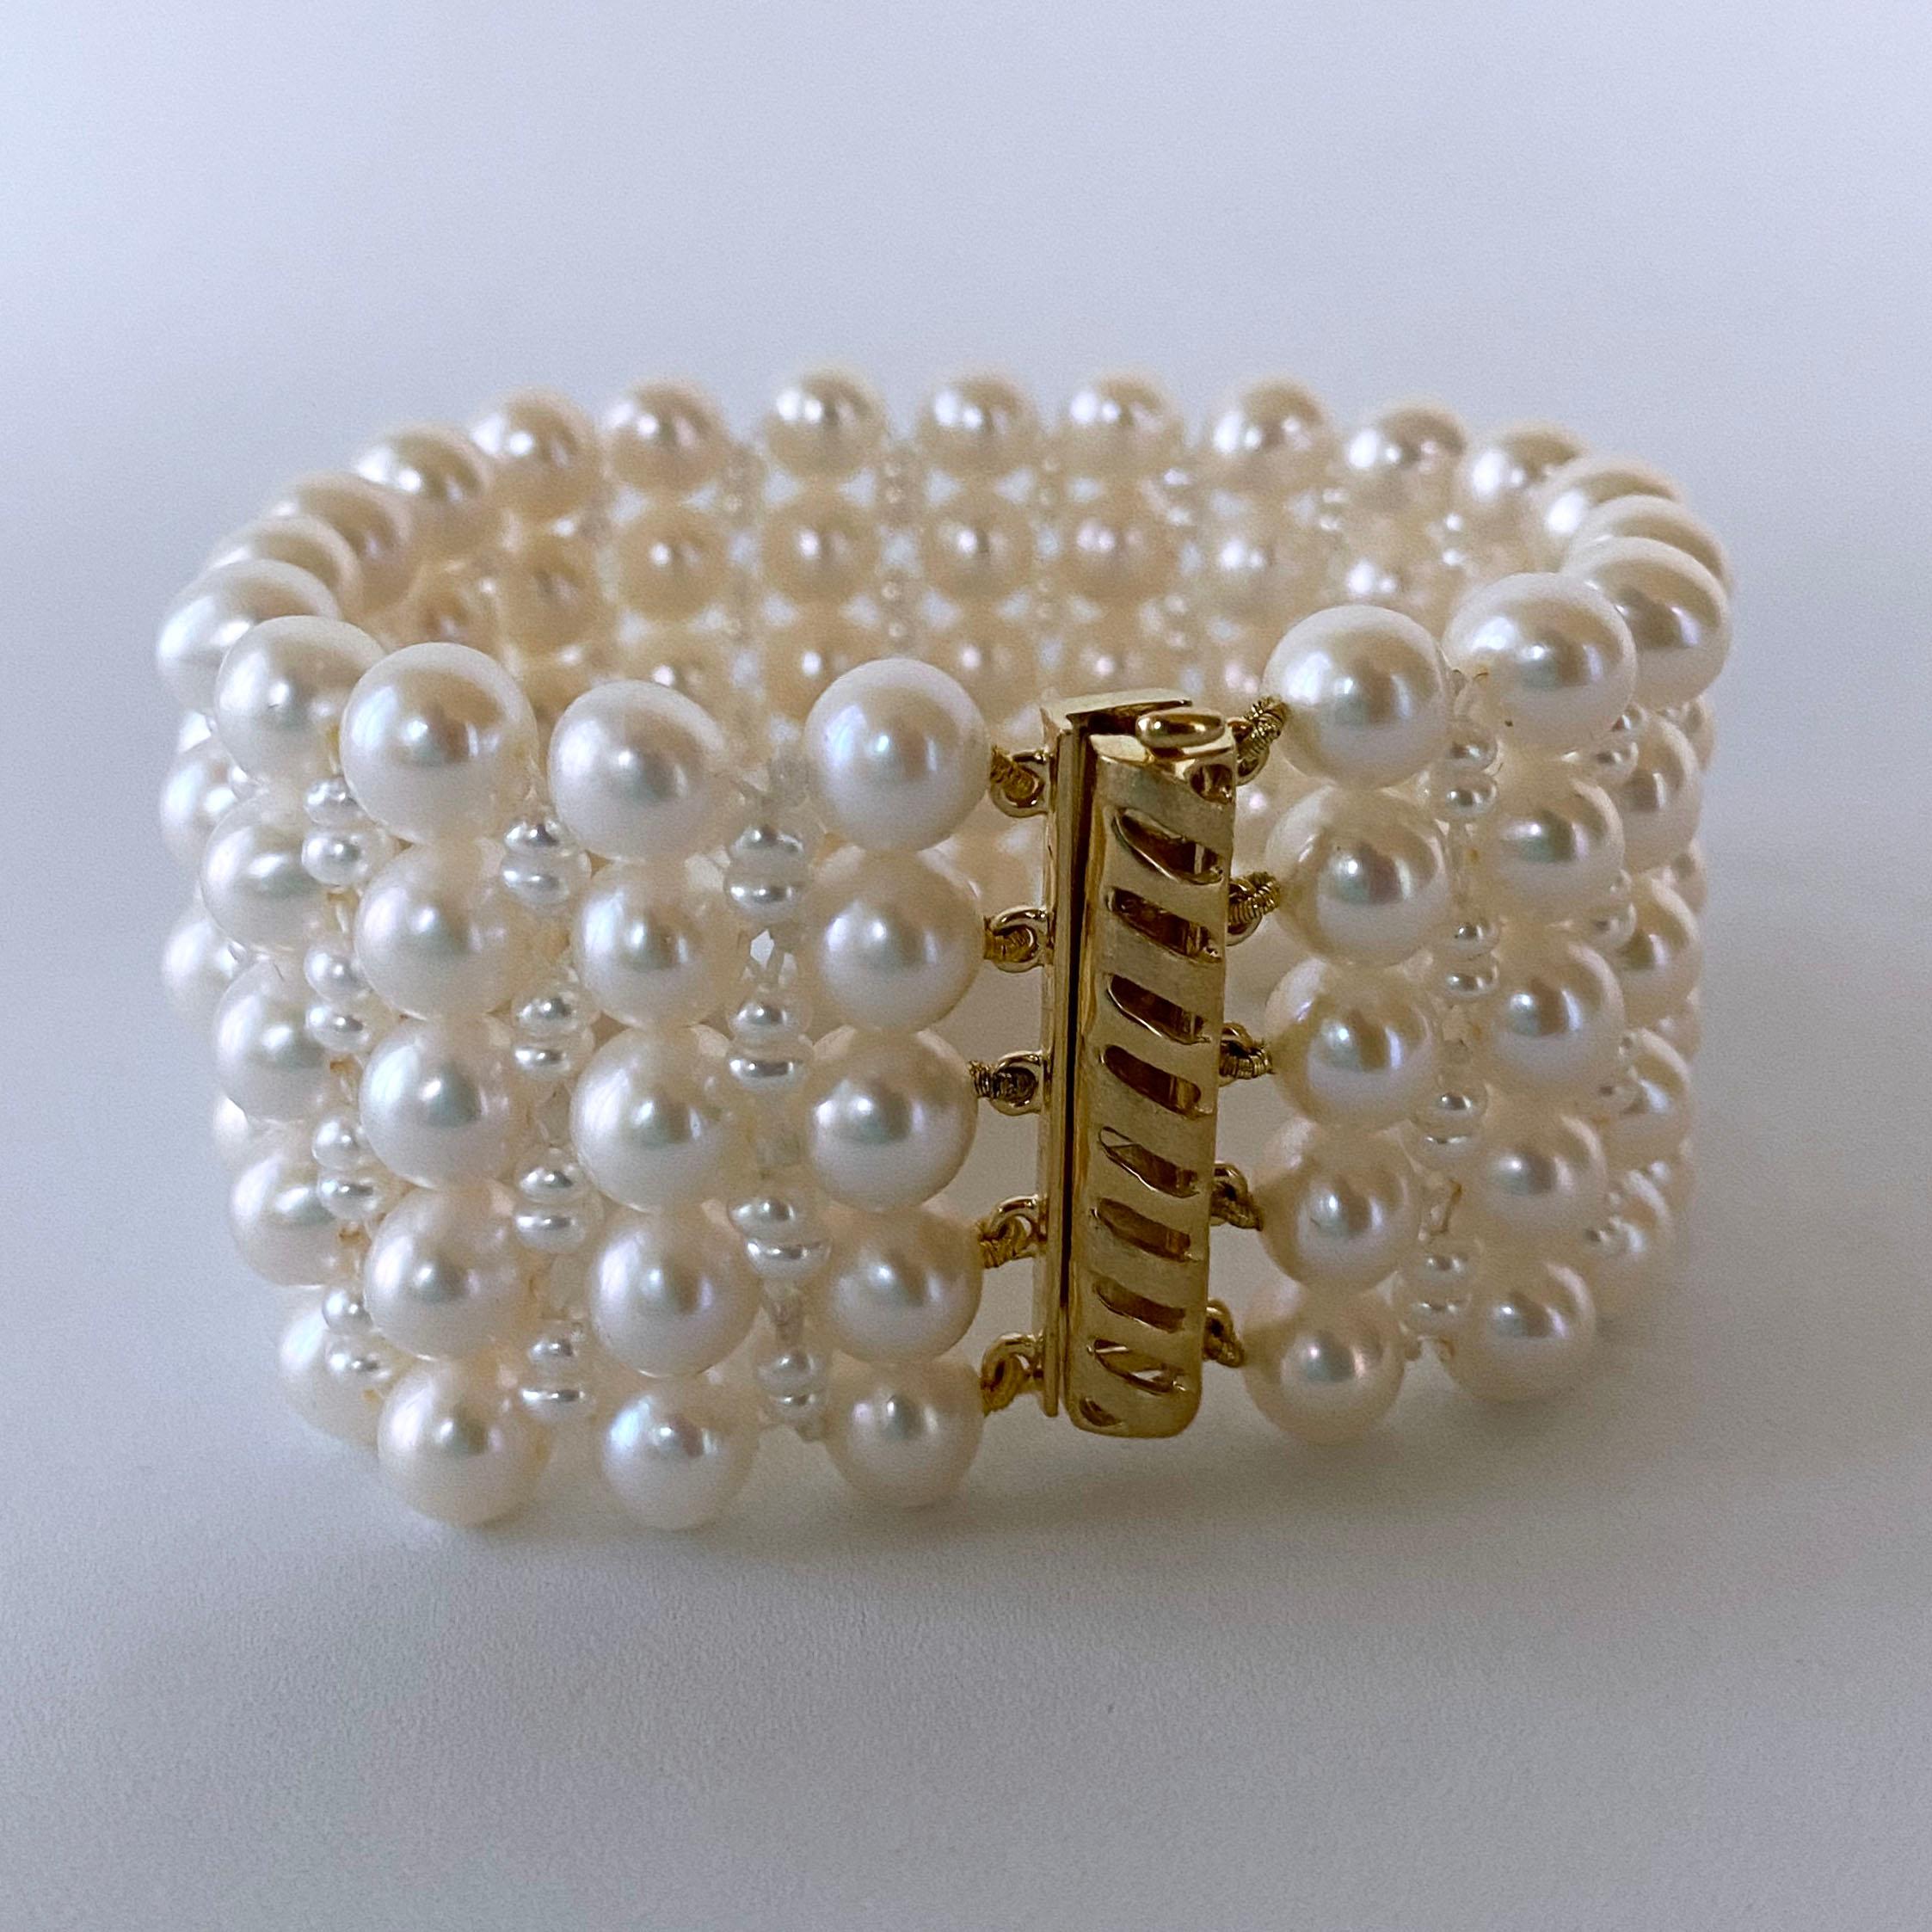 Marina J. Woven Pearl Bracelet with 14k Yellow Gold Plated Silver Sliding Clasp For Sale 4